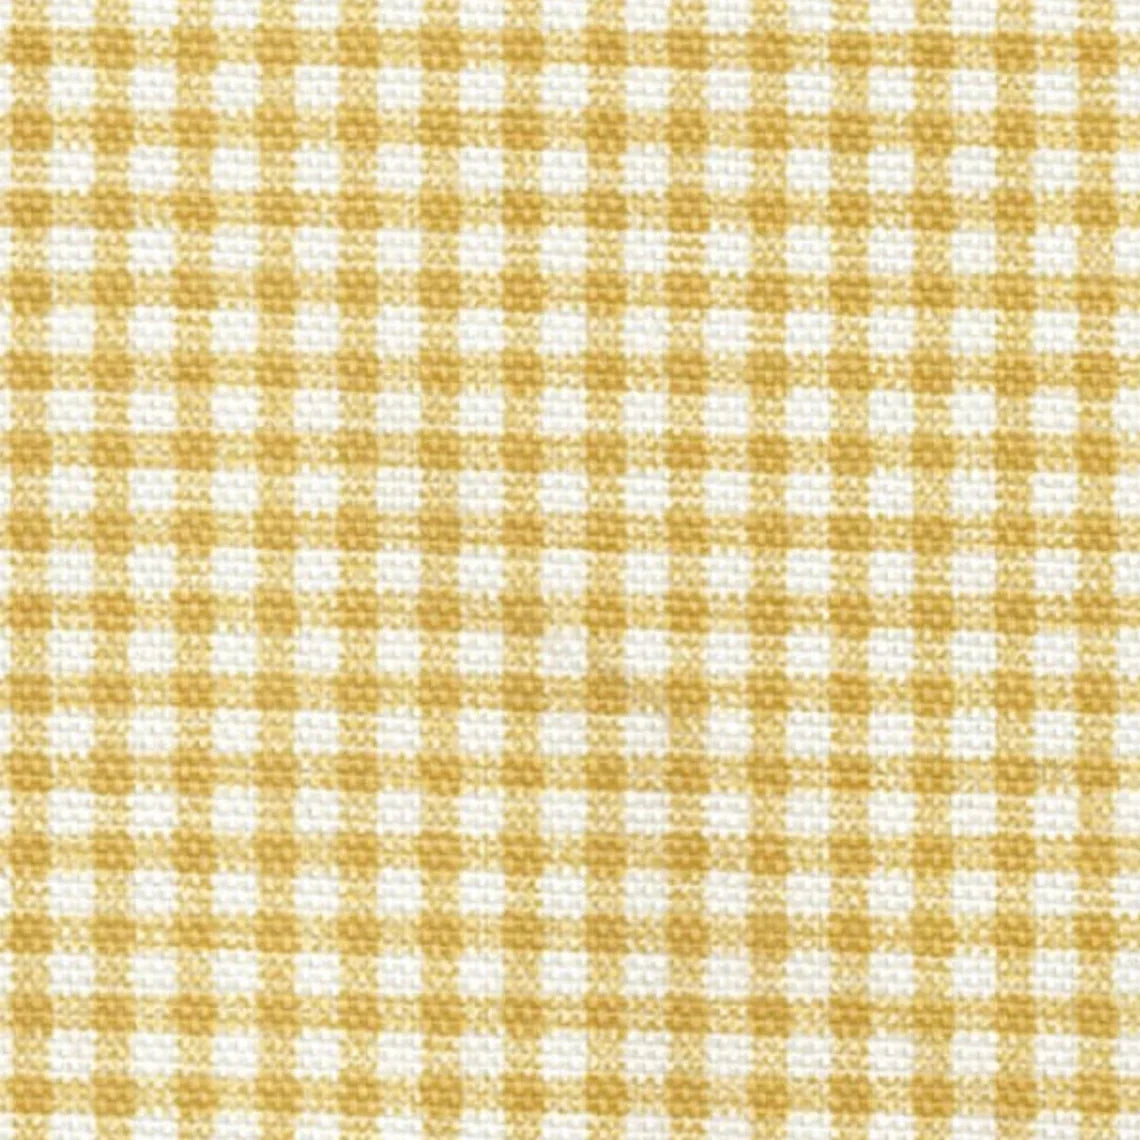 scalloped valance in farmhouse barley yellow gold gingham check